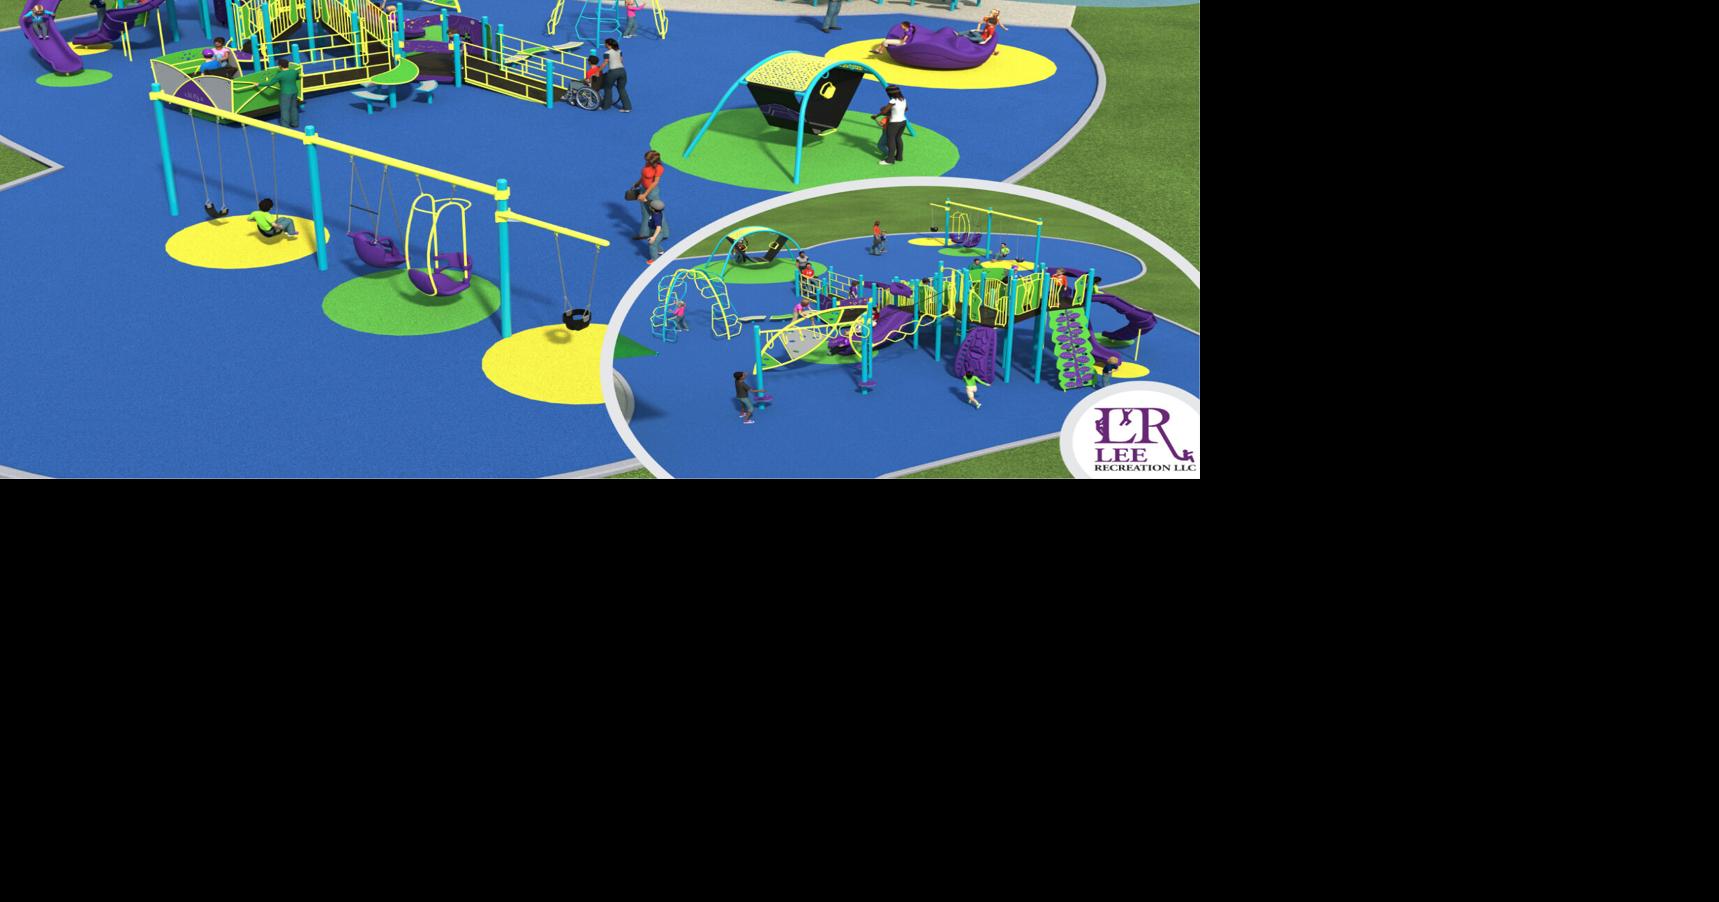 Information session on RIpon’s new all-inclusive playground planned for Tuesday | News